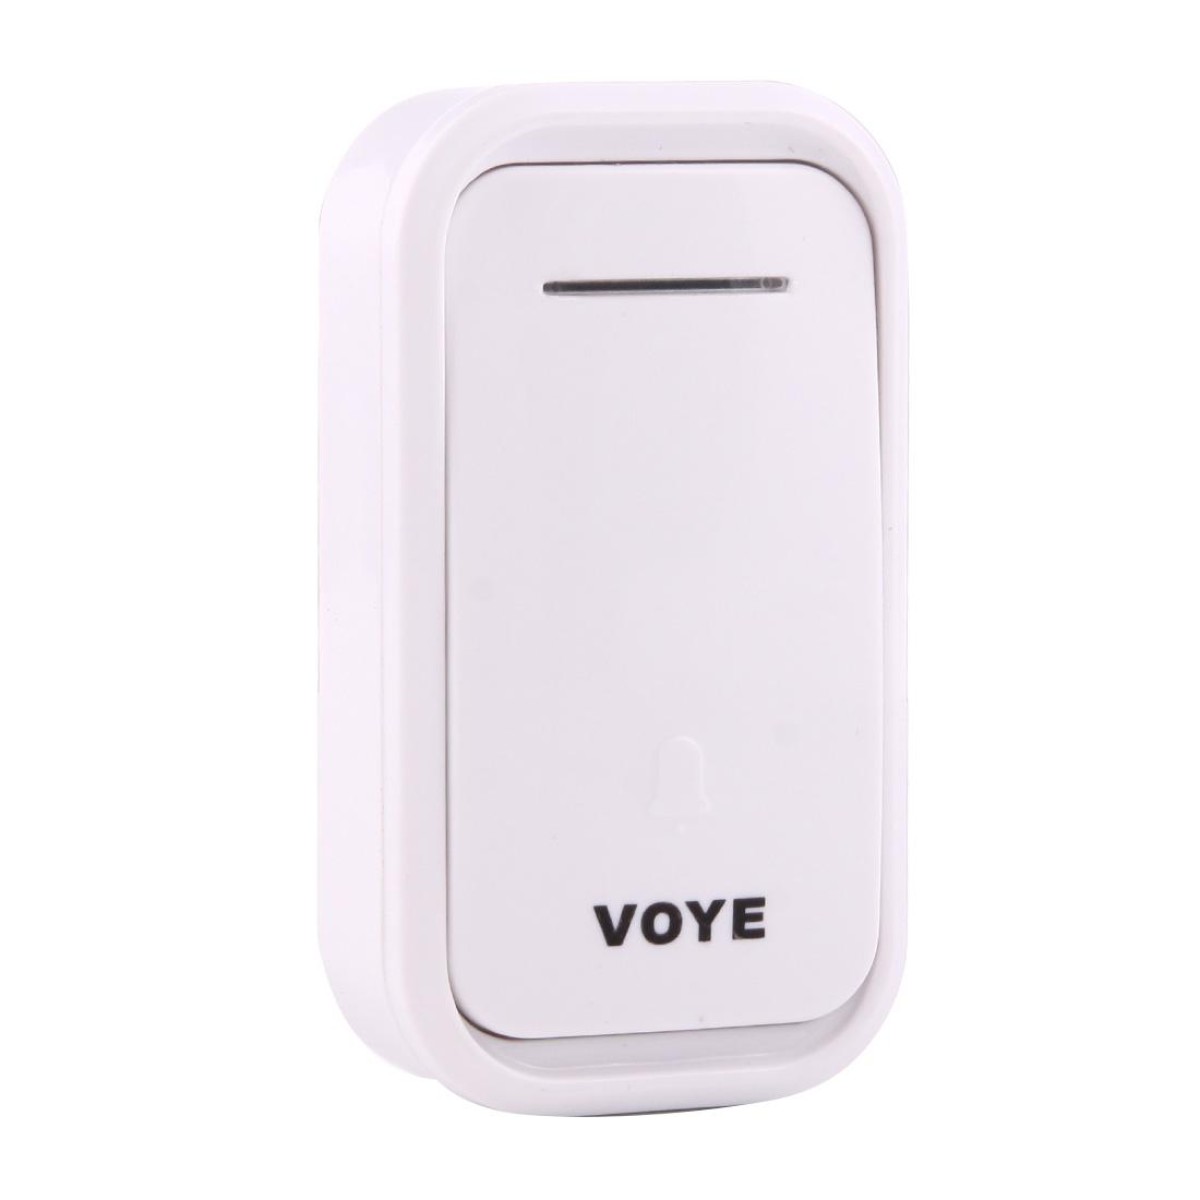 VOYE V015F2 Wireless Smart Music Home Doorbell with Dual Receiver, Remote Control Distance: 120m (Open Air)